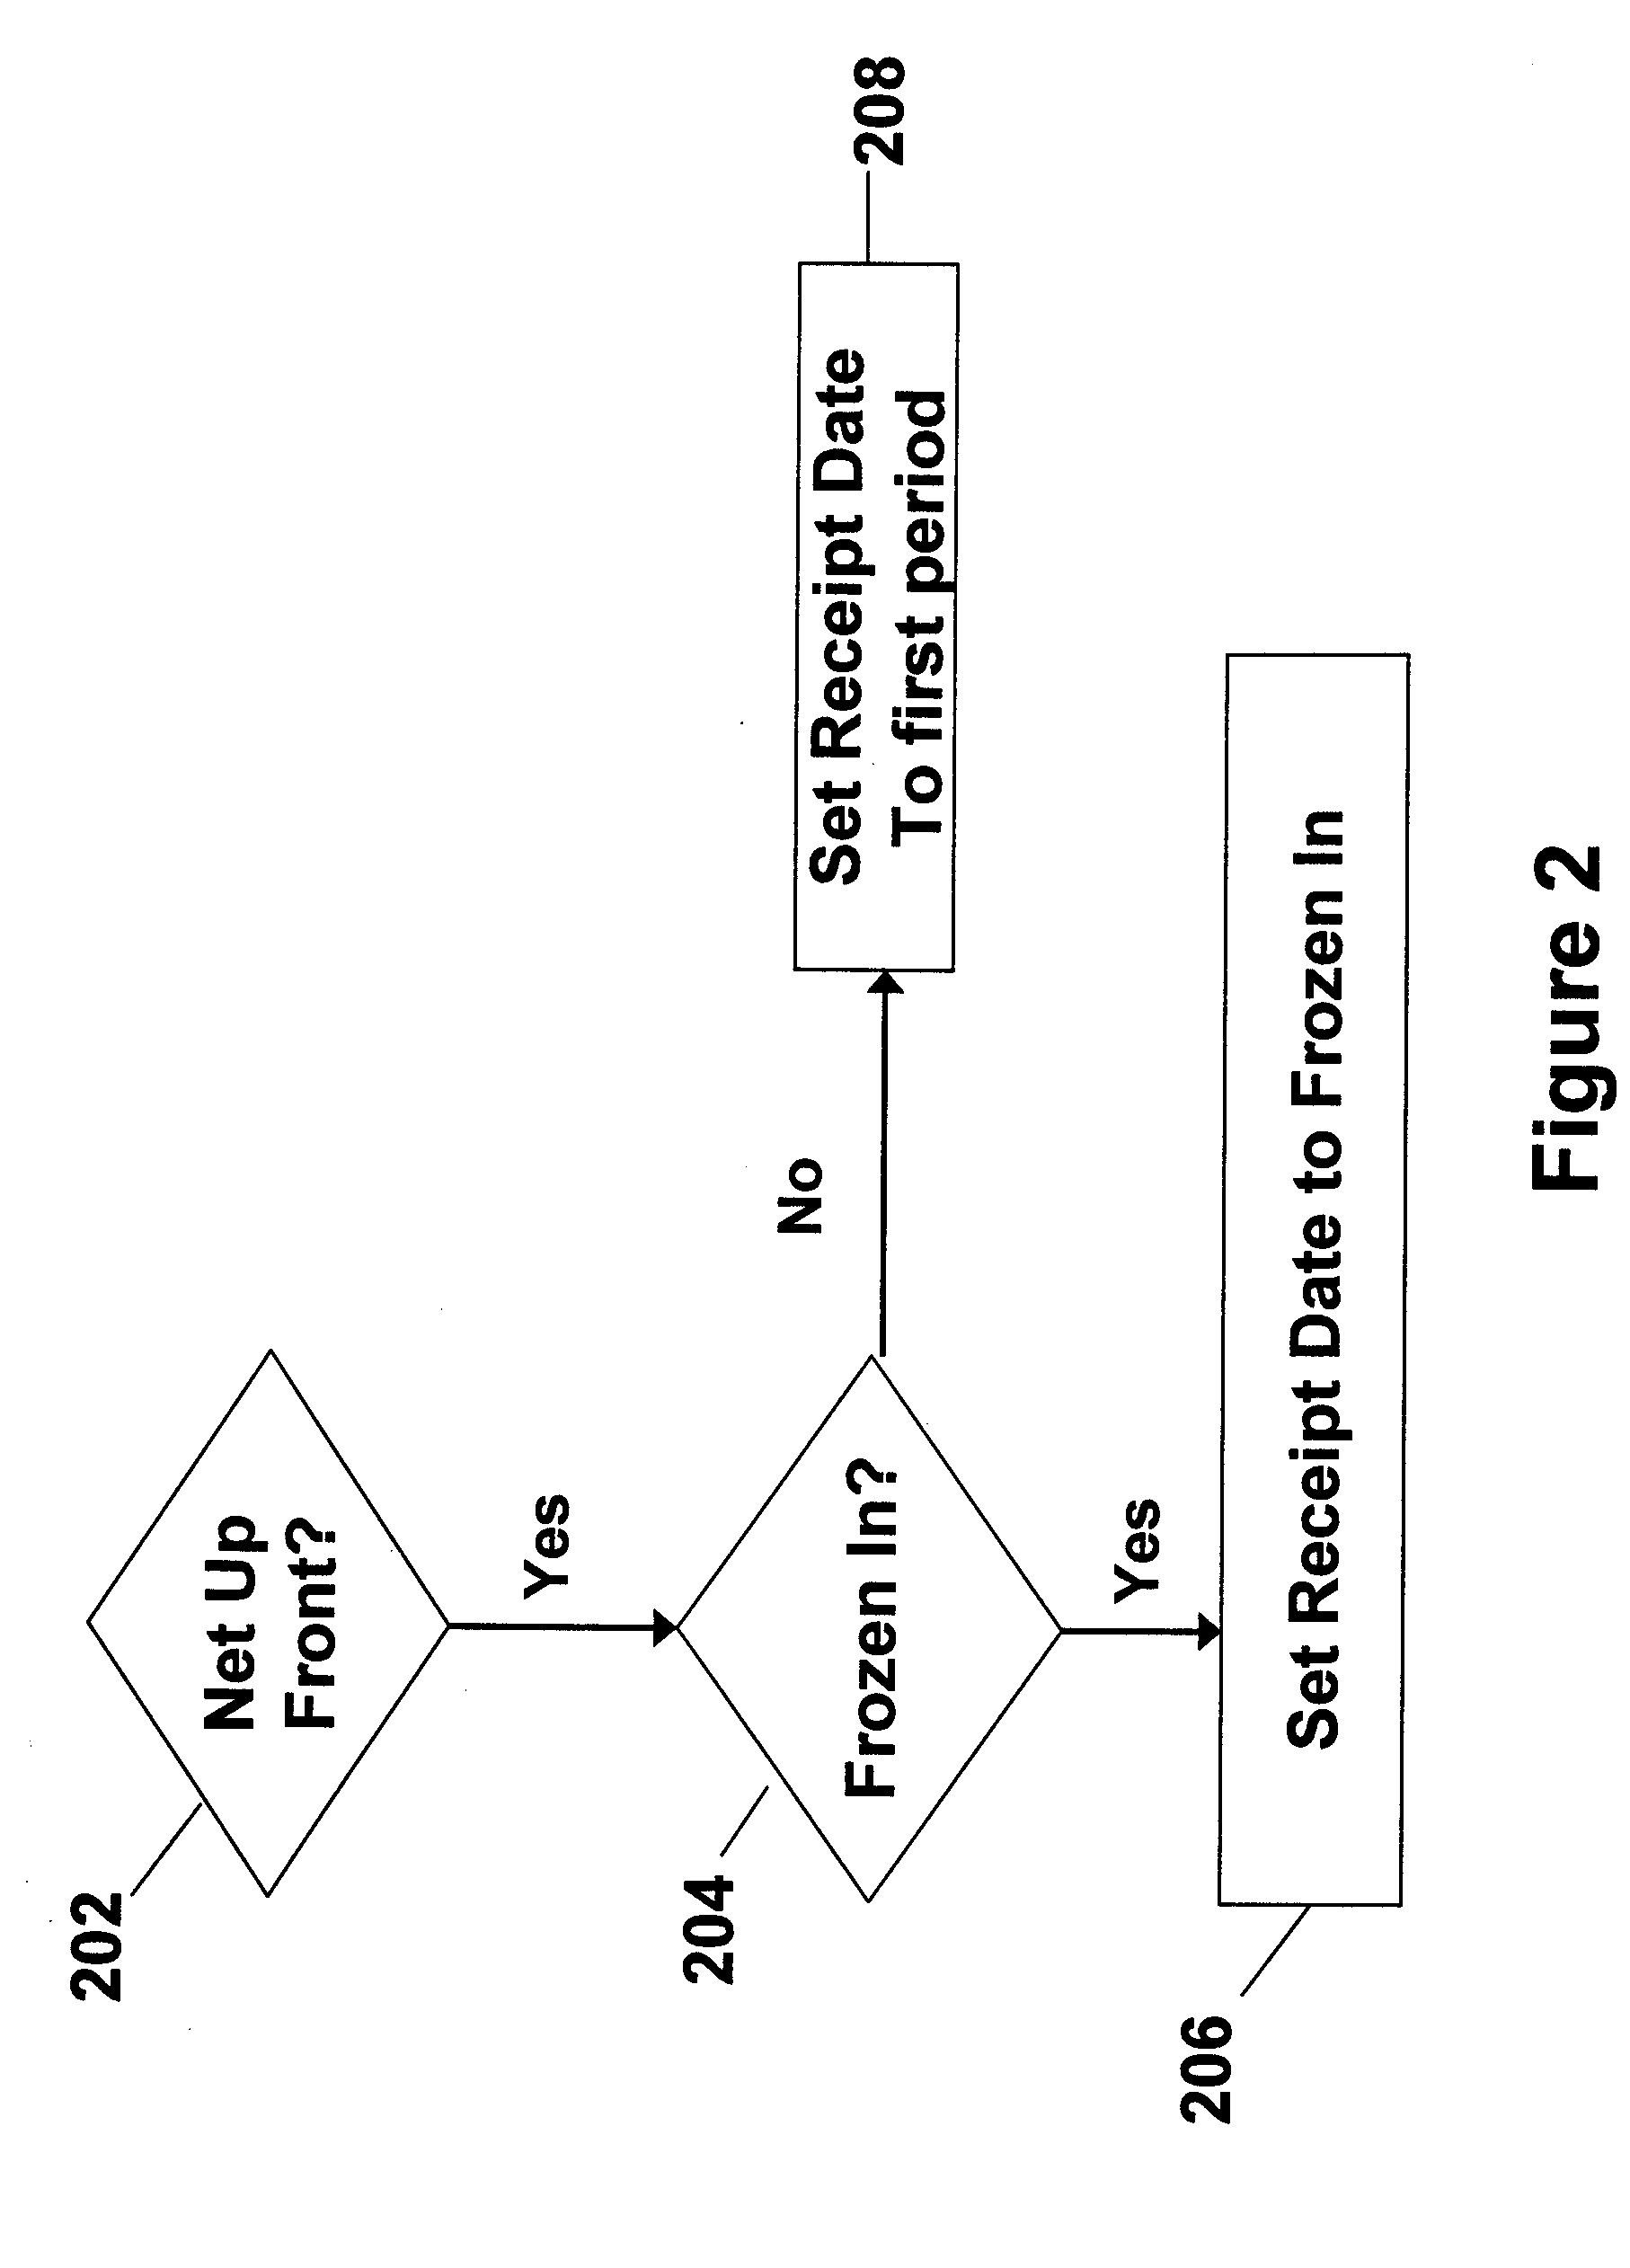 Method for purchase order rescheduling in a linear program